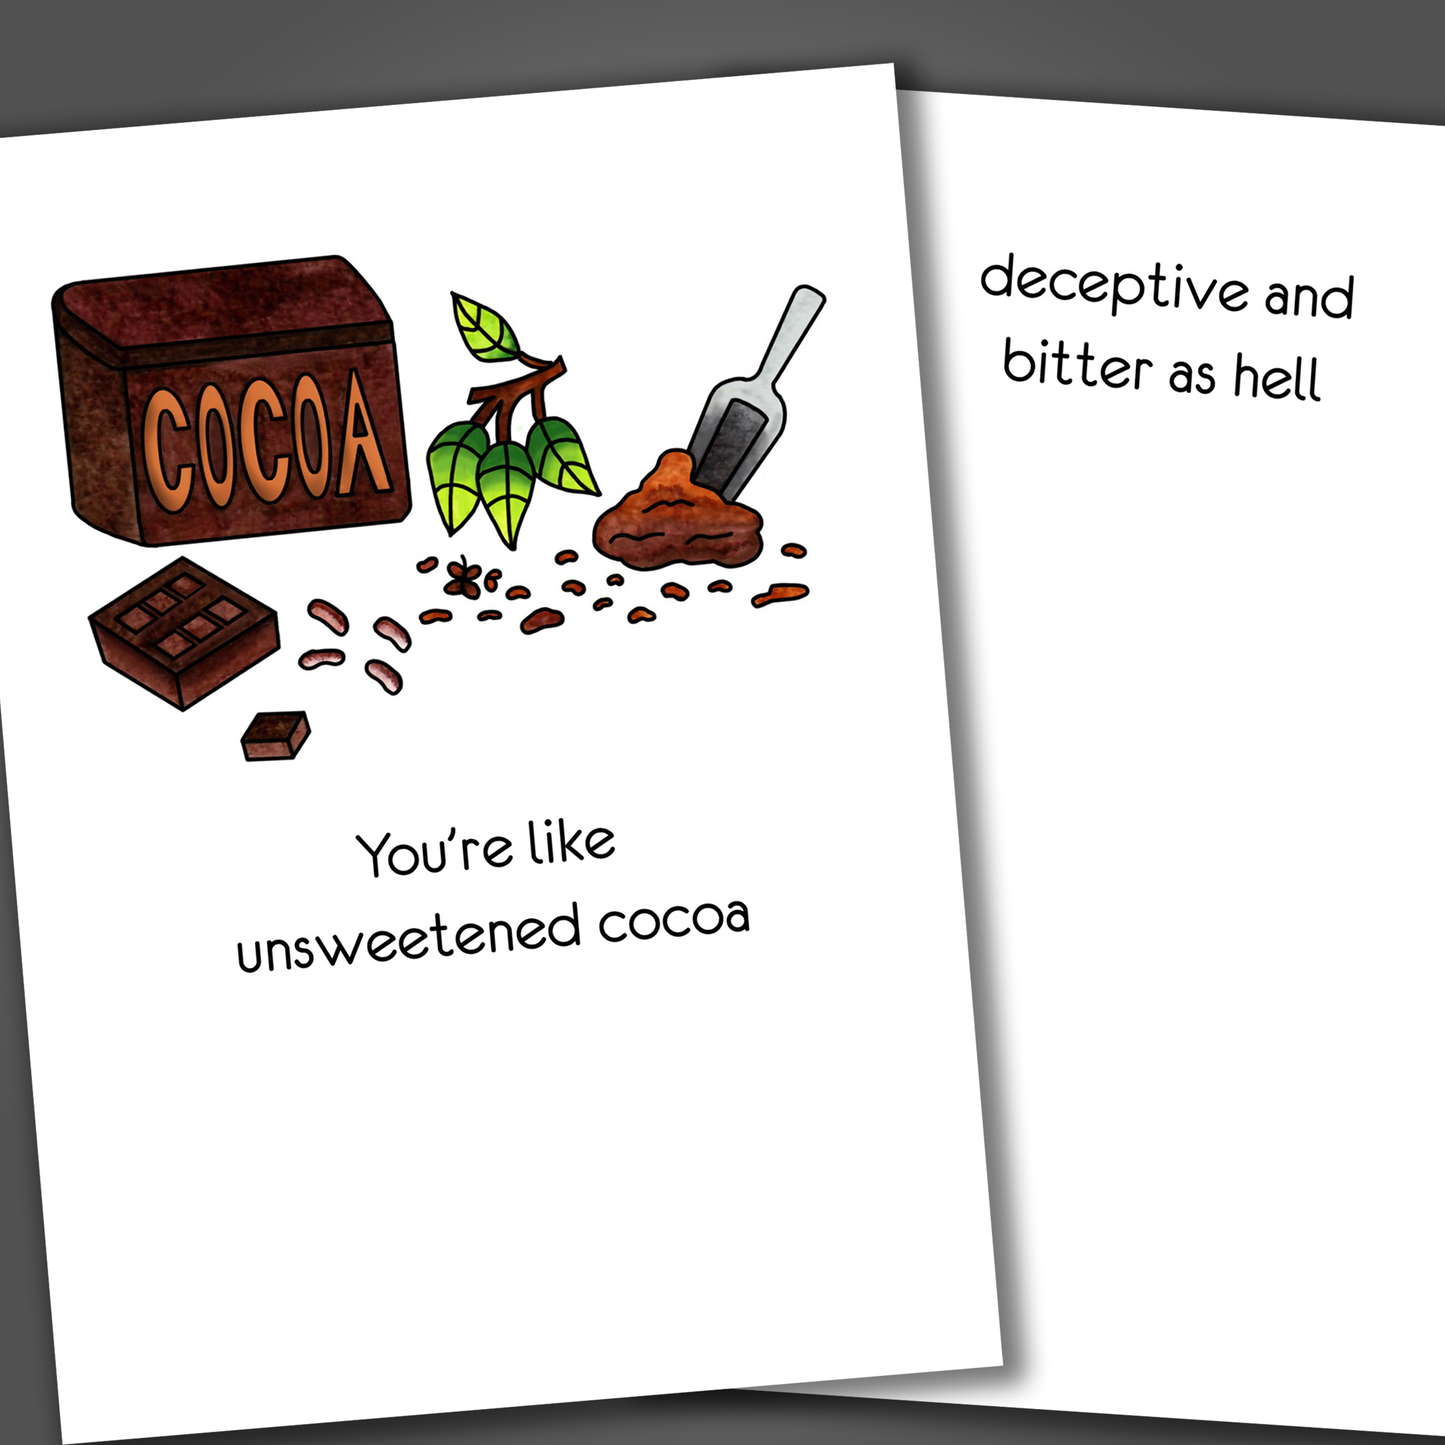 Funny divorce or breakup card with cocoa drawn on the front of the card. Inside the card is a joke that says the receiver is deceptive and bitter like unsweetened cocoa.